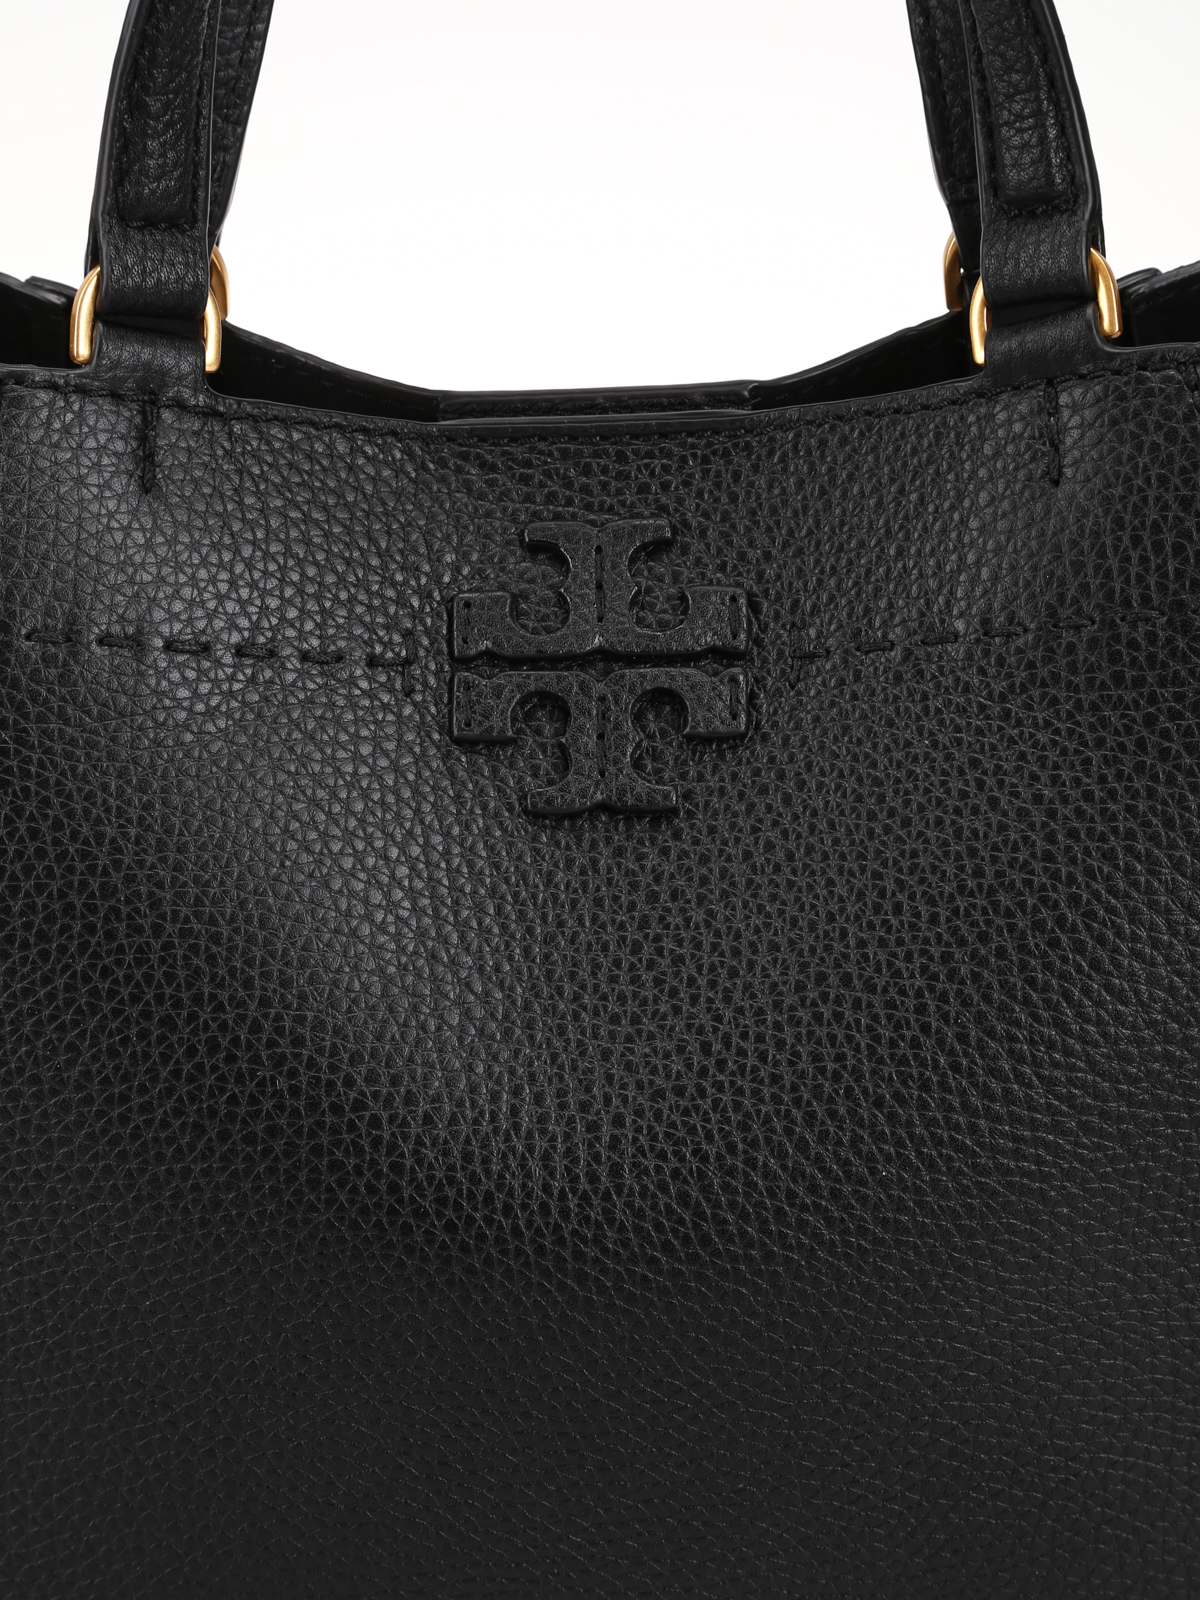 Totes bags Tory Burch - Black leather small McGraw carryall - 510651118001